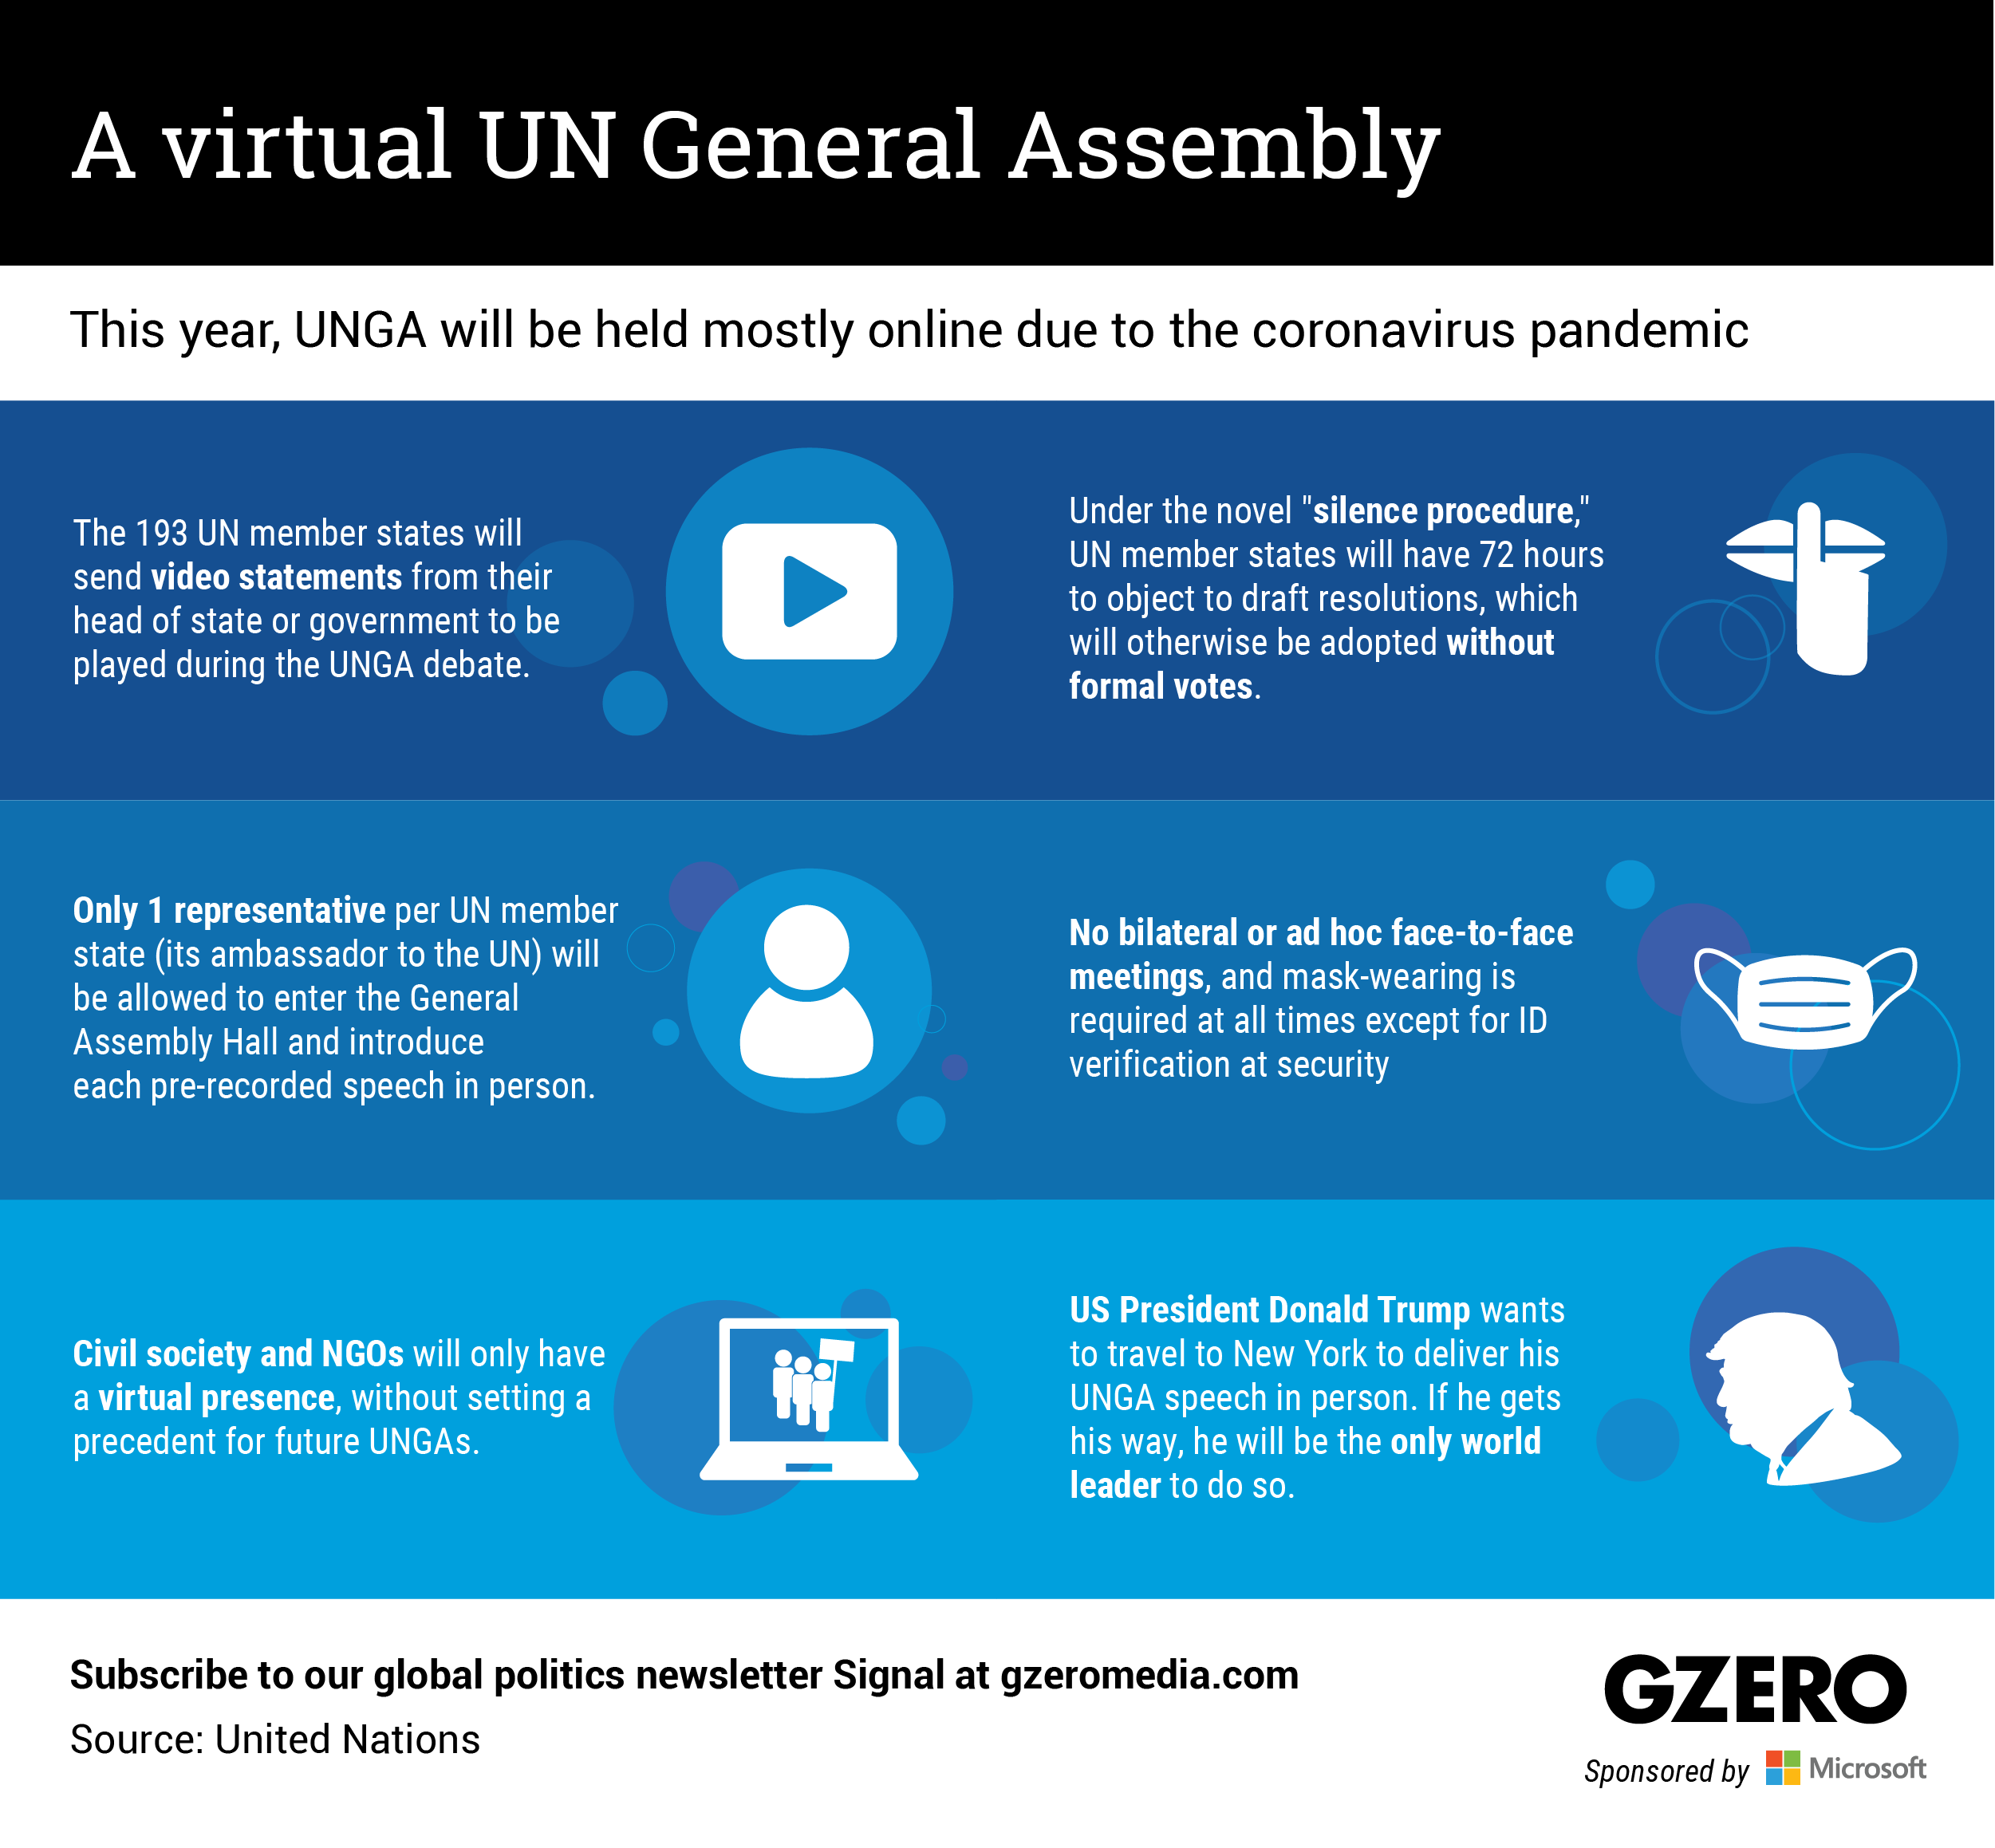 The Graphic Truth: A virtual UN General Assembly